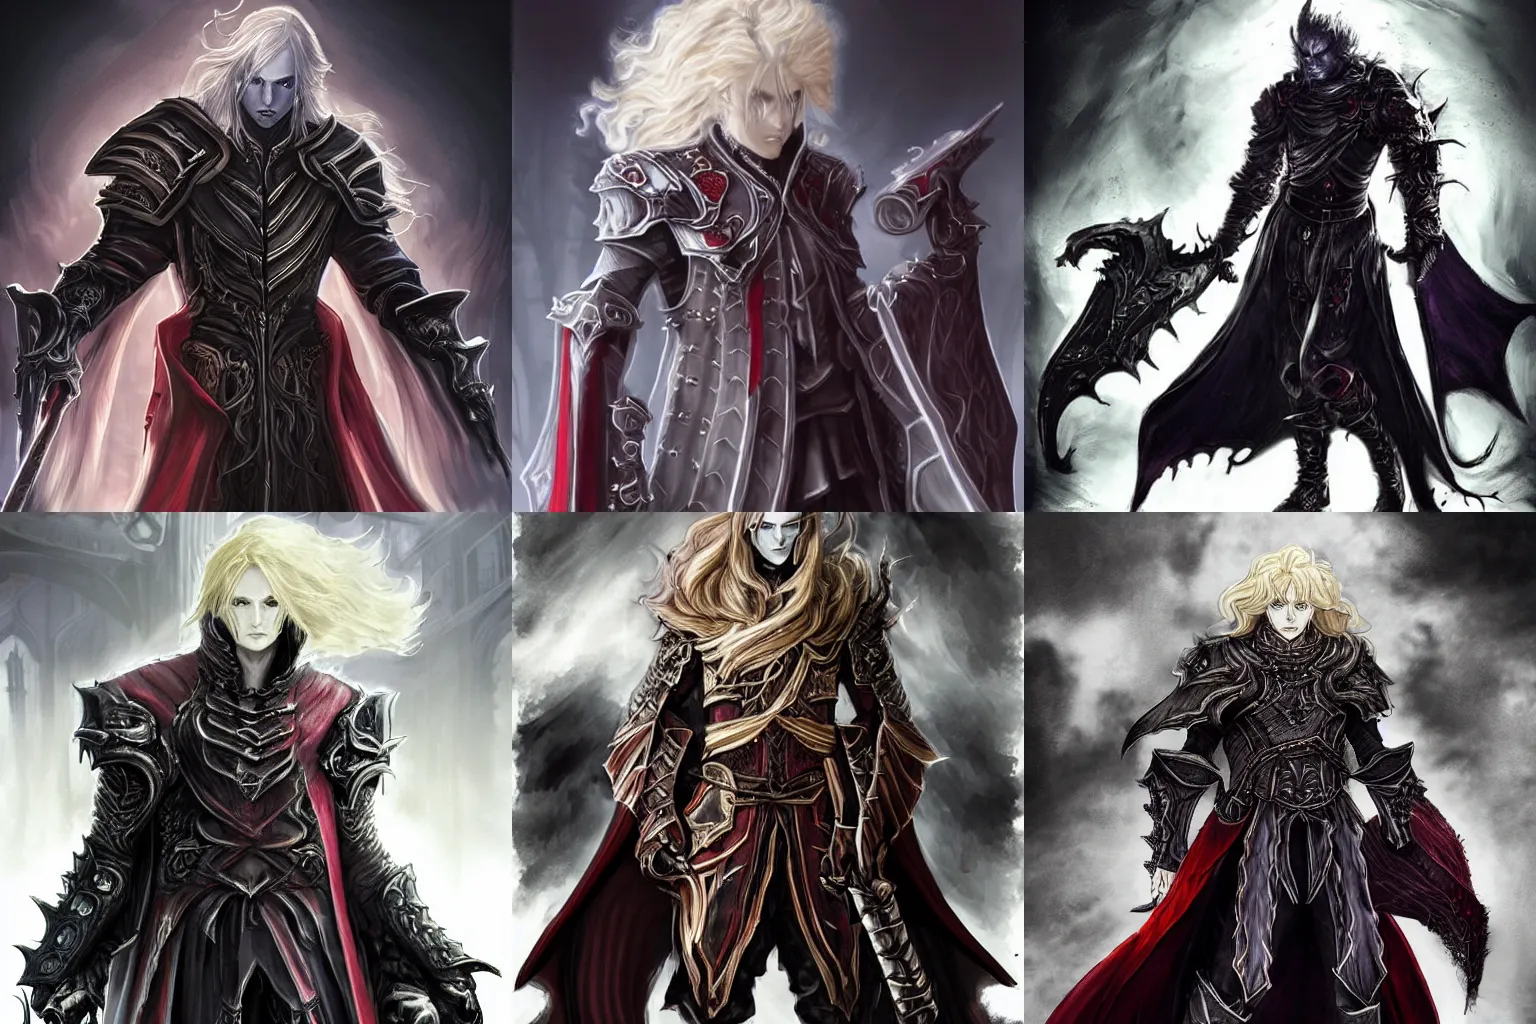 Prompt: blond long curly haired Lucius bloodborne concept art, dramatic darkness, handsome young vampire prince mega evil lv99 praetorian raid boss, jagged black armor with long red tabard, soft focus